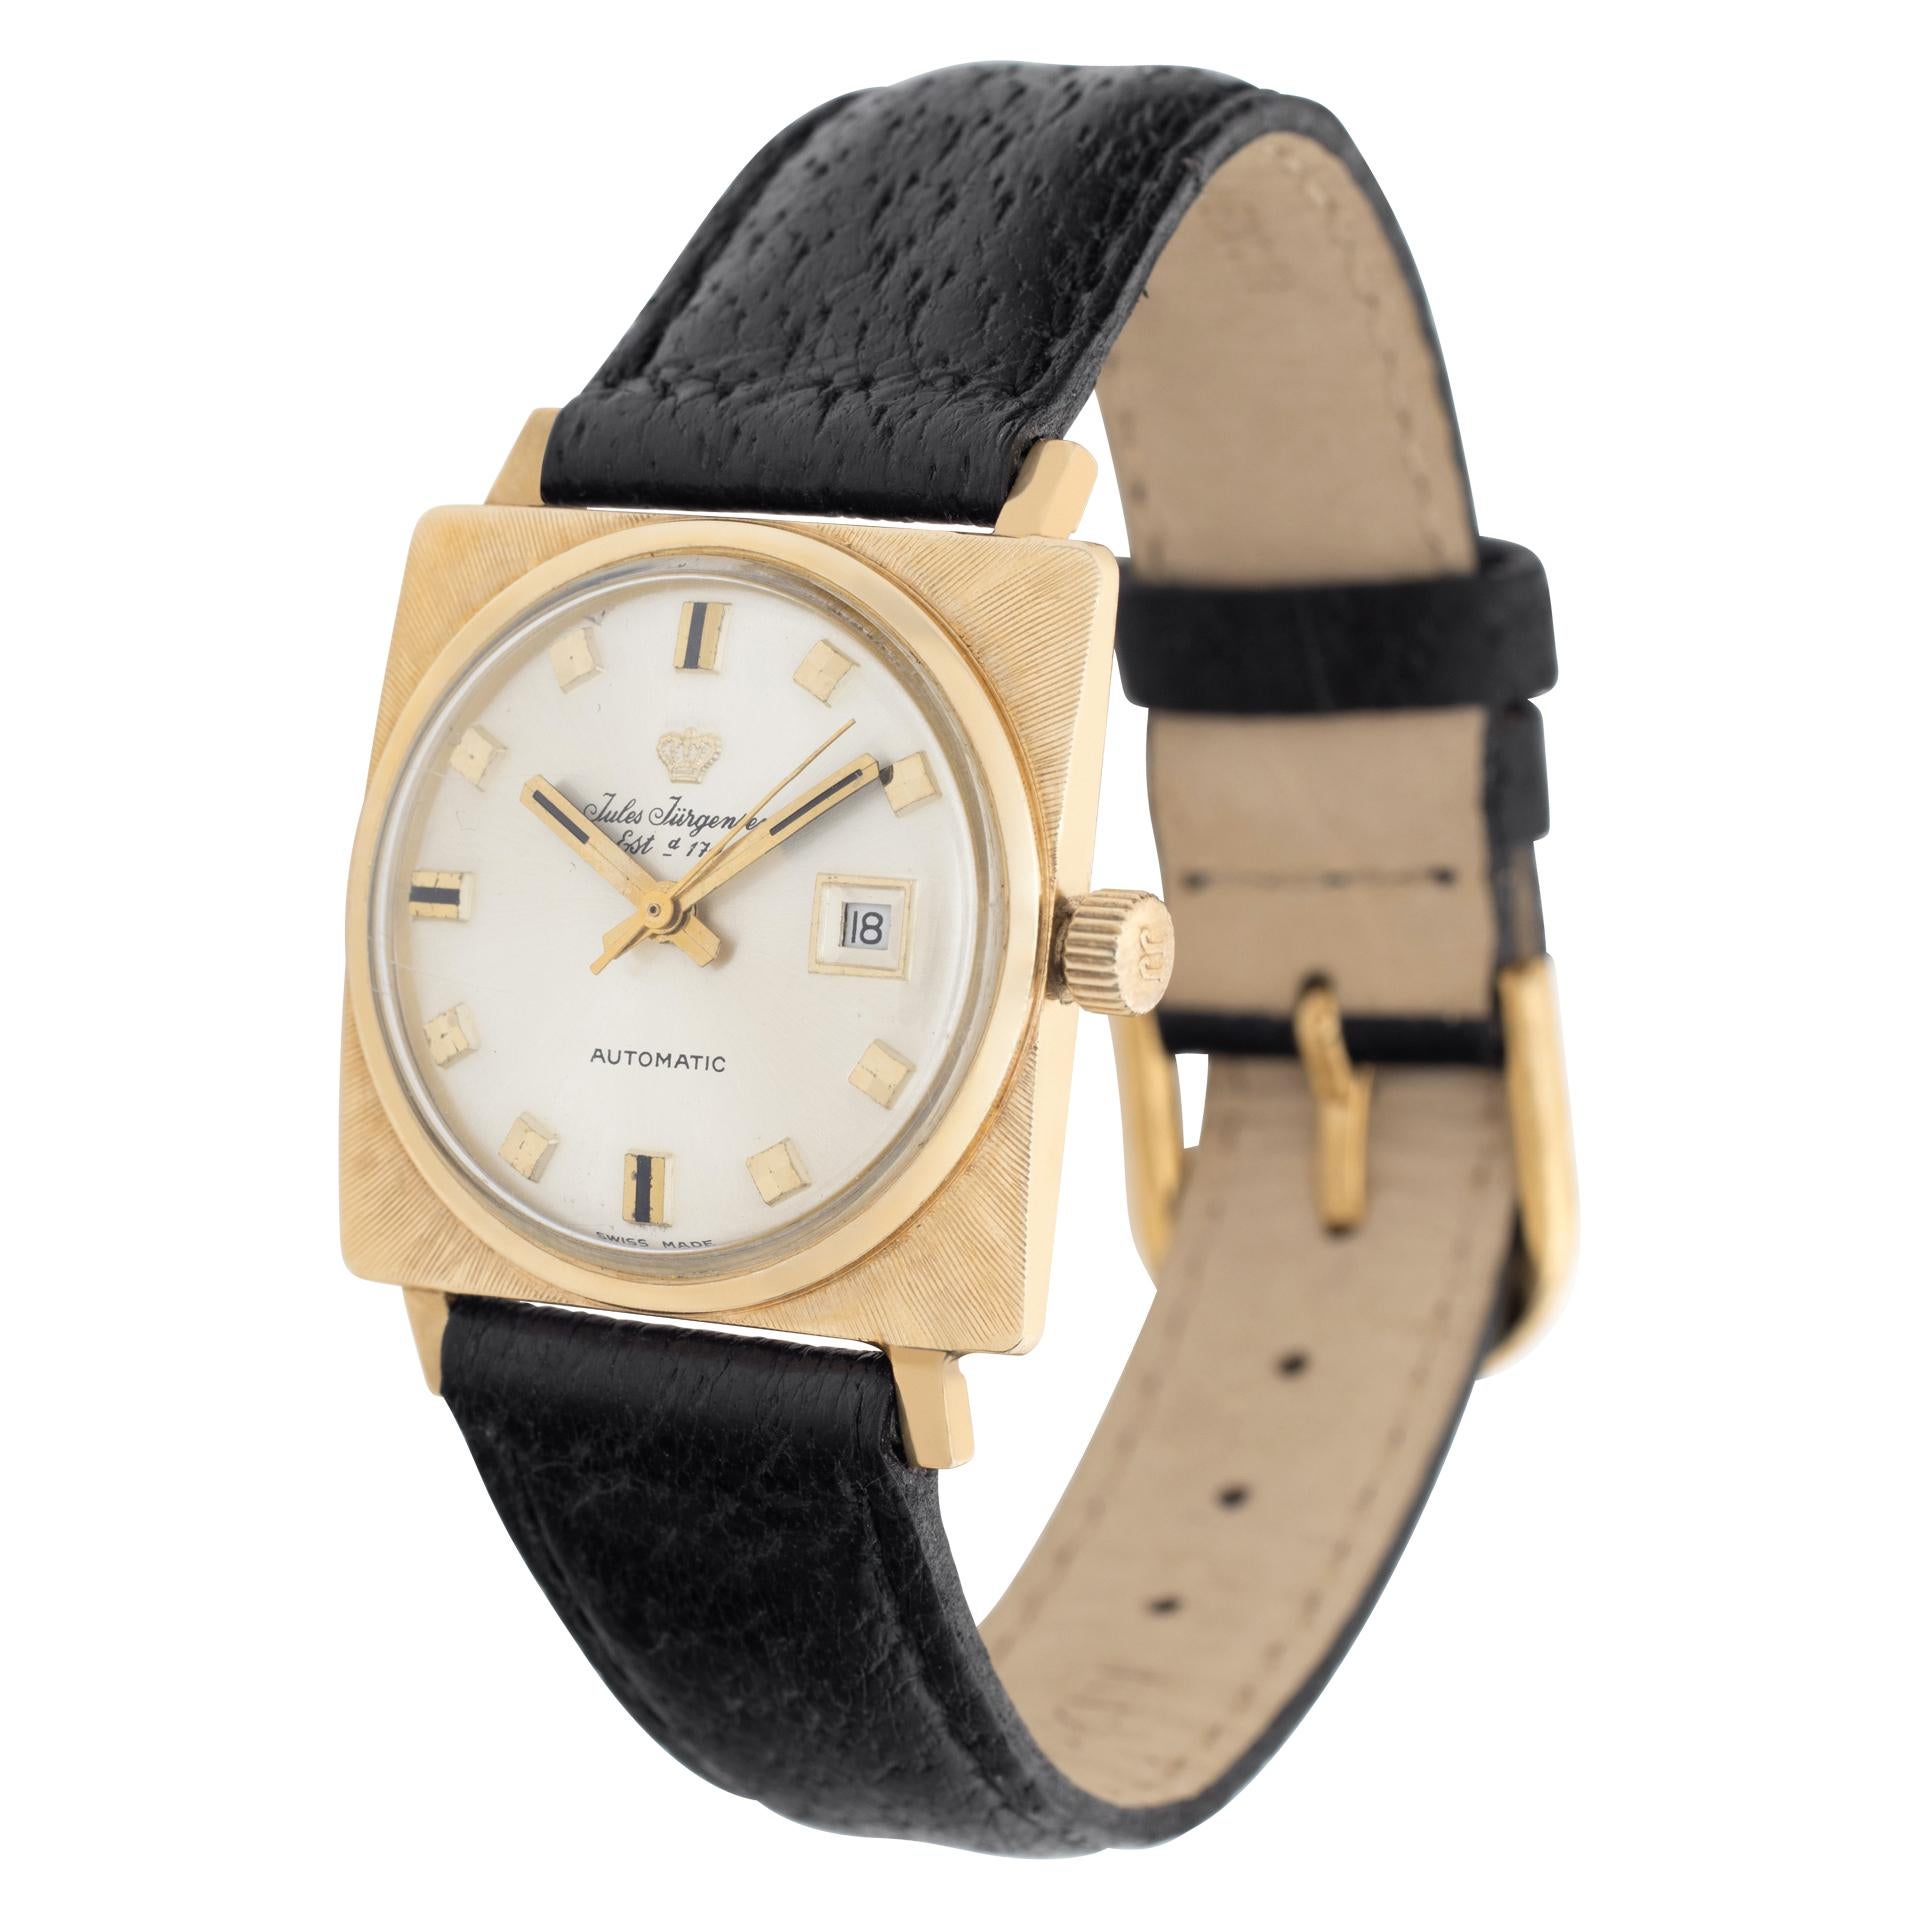 Vintage Jules Jurgensen with square 14k yellow gold case, 14k bezel, leather black band with two piece clasp. Manual wind. Fine Pre-owned Jules Jurgensen Watch. Certified preowned Vintage Jules Jurgensen Classic watch is made out of yellow gold on a